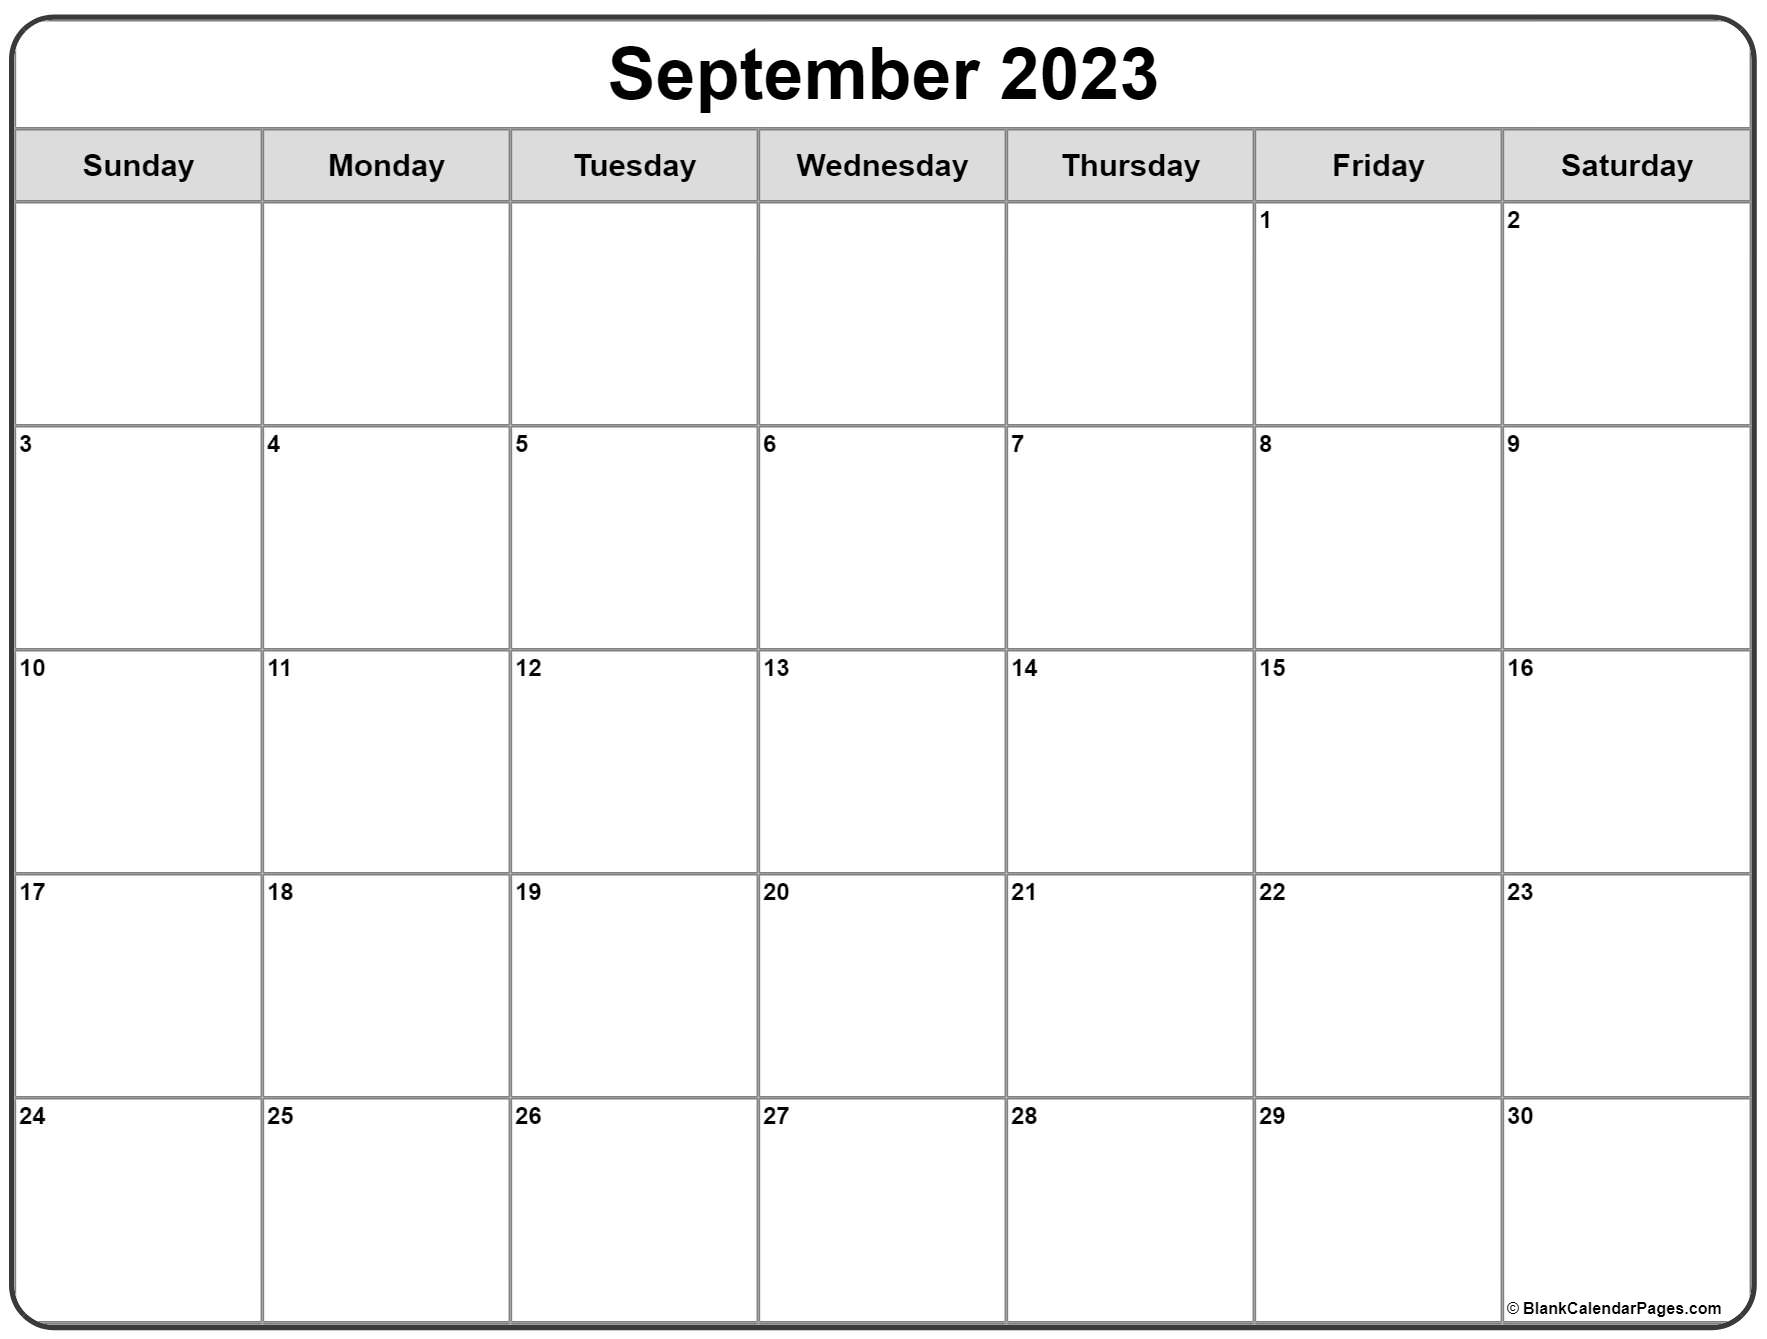 september-2023-calendar-with-extra-large-dates-wikidates